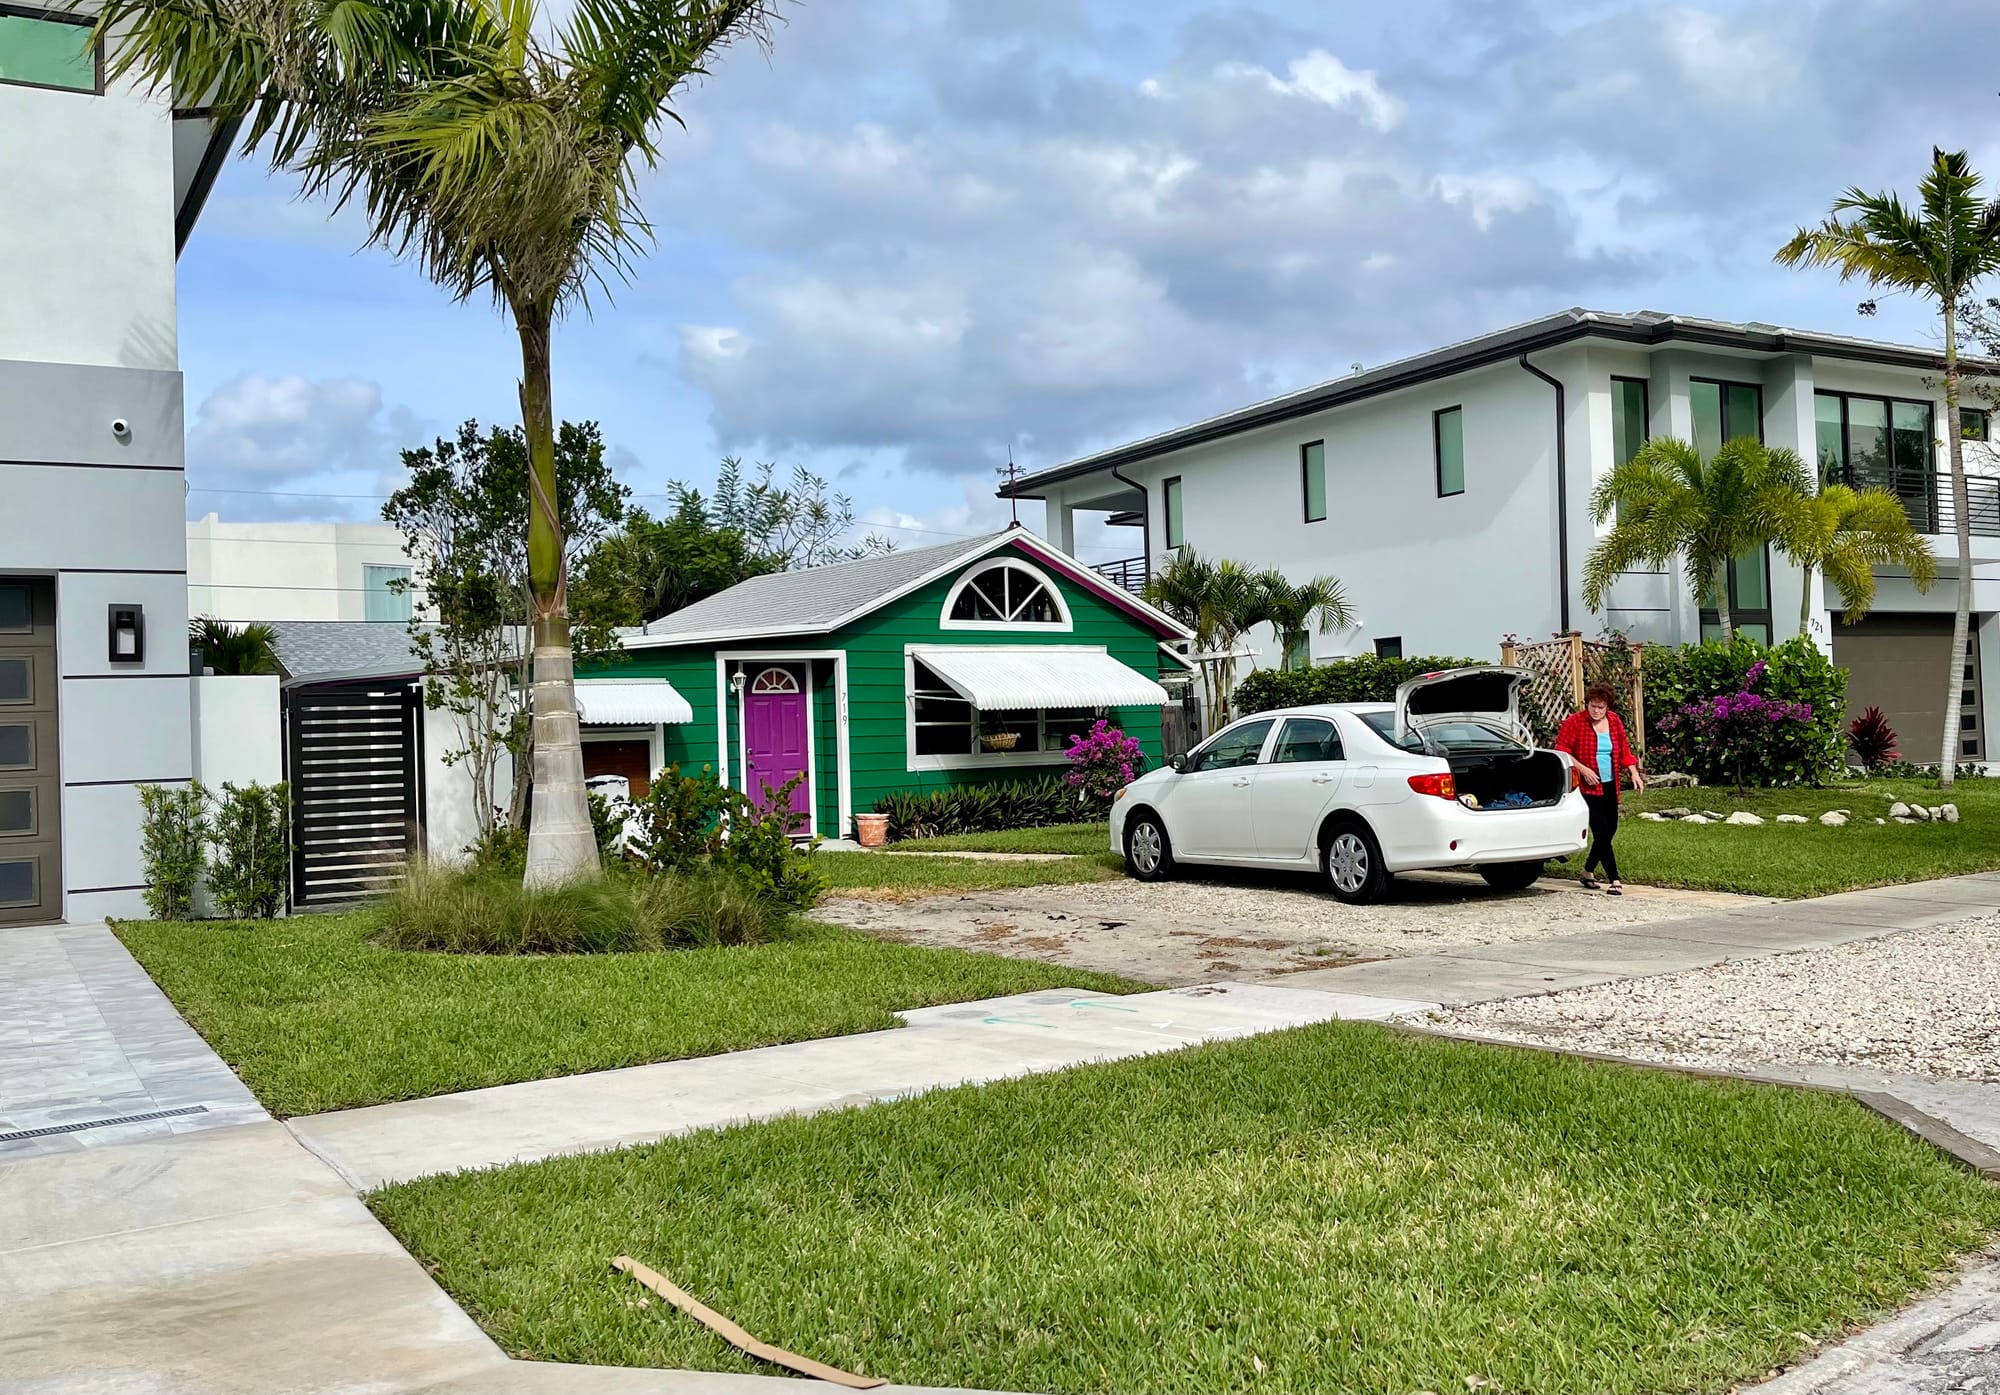 A Placemaking Strategy for Creating "Village Life" in Delray Beach